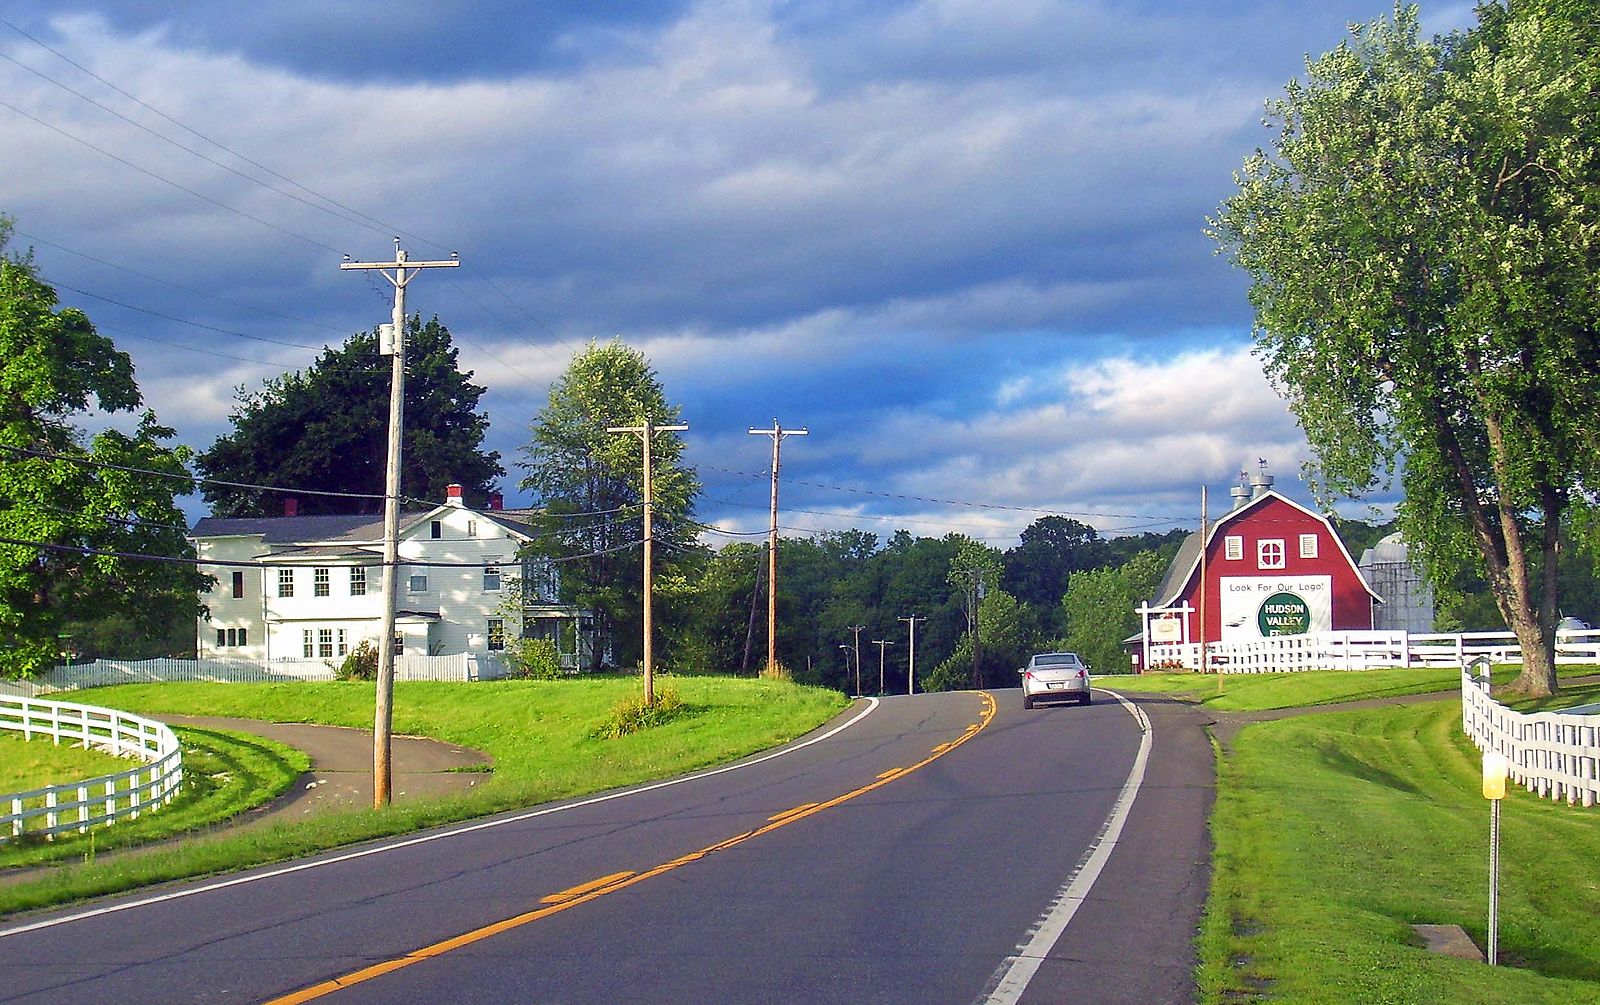 Countryside on US 9 north of Red Hook, NY, USA, by Daniel Cooke - Original: https://commons.wikimedia.org/wiki/File:US_9_north_of_Red_Hook,_NY.jpg